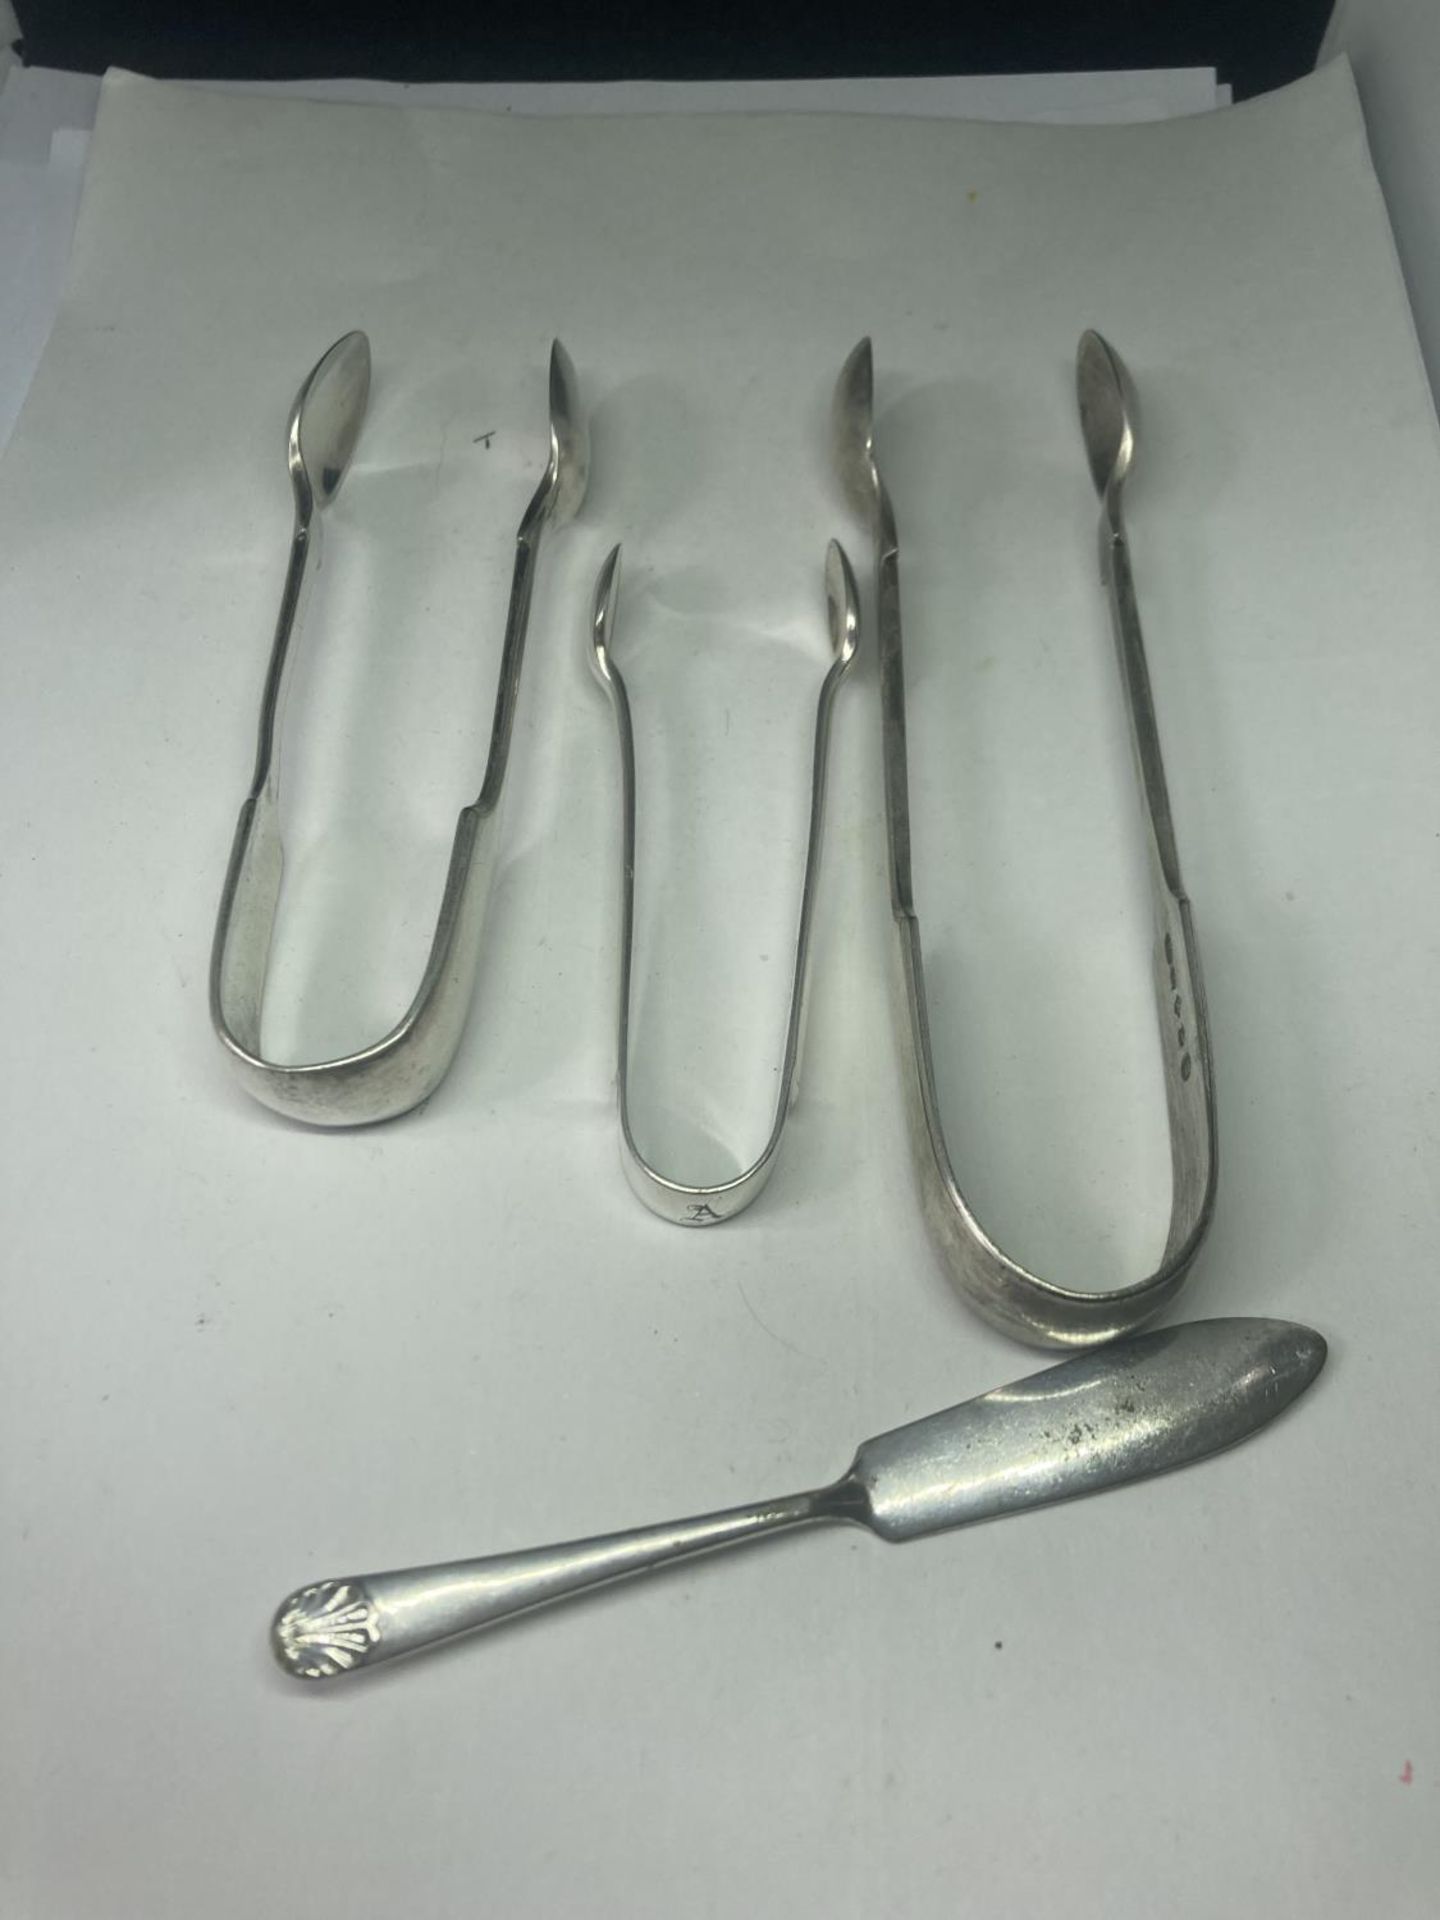 FOUE SILVER PLATED ITEMS TO INCLUDE THREE SETS OF NIPS AND A BUTTER KNIFE - Image 2 of 4